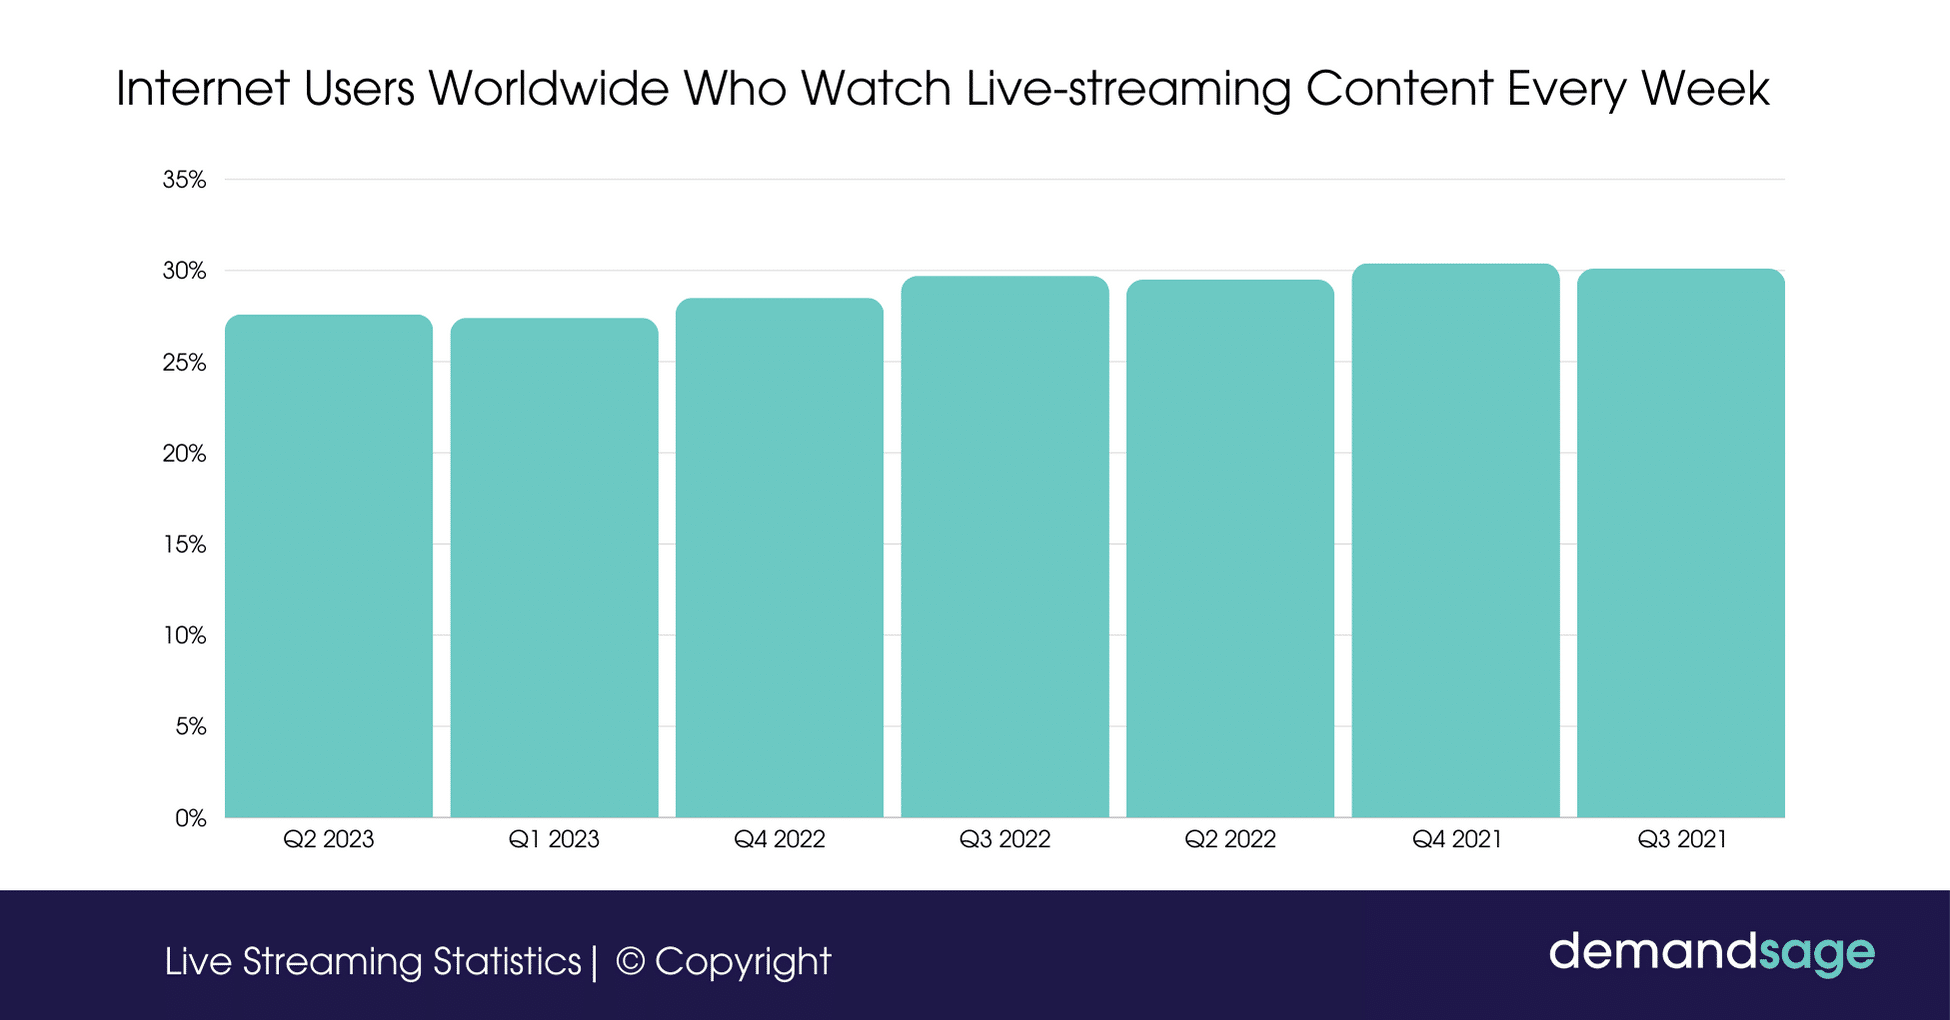 Internet Users Worldwide Who Watch Live-streaming Content Every Week